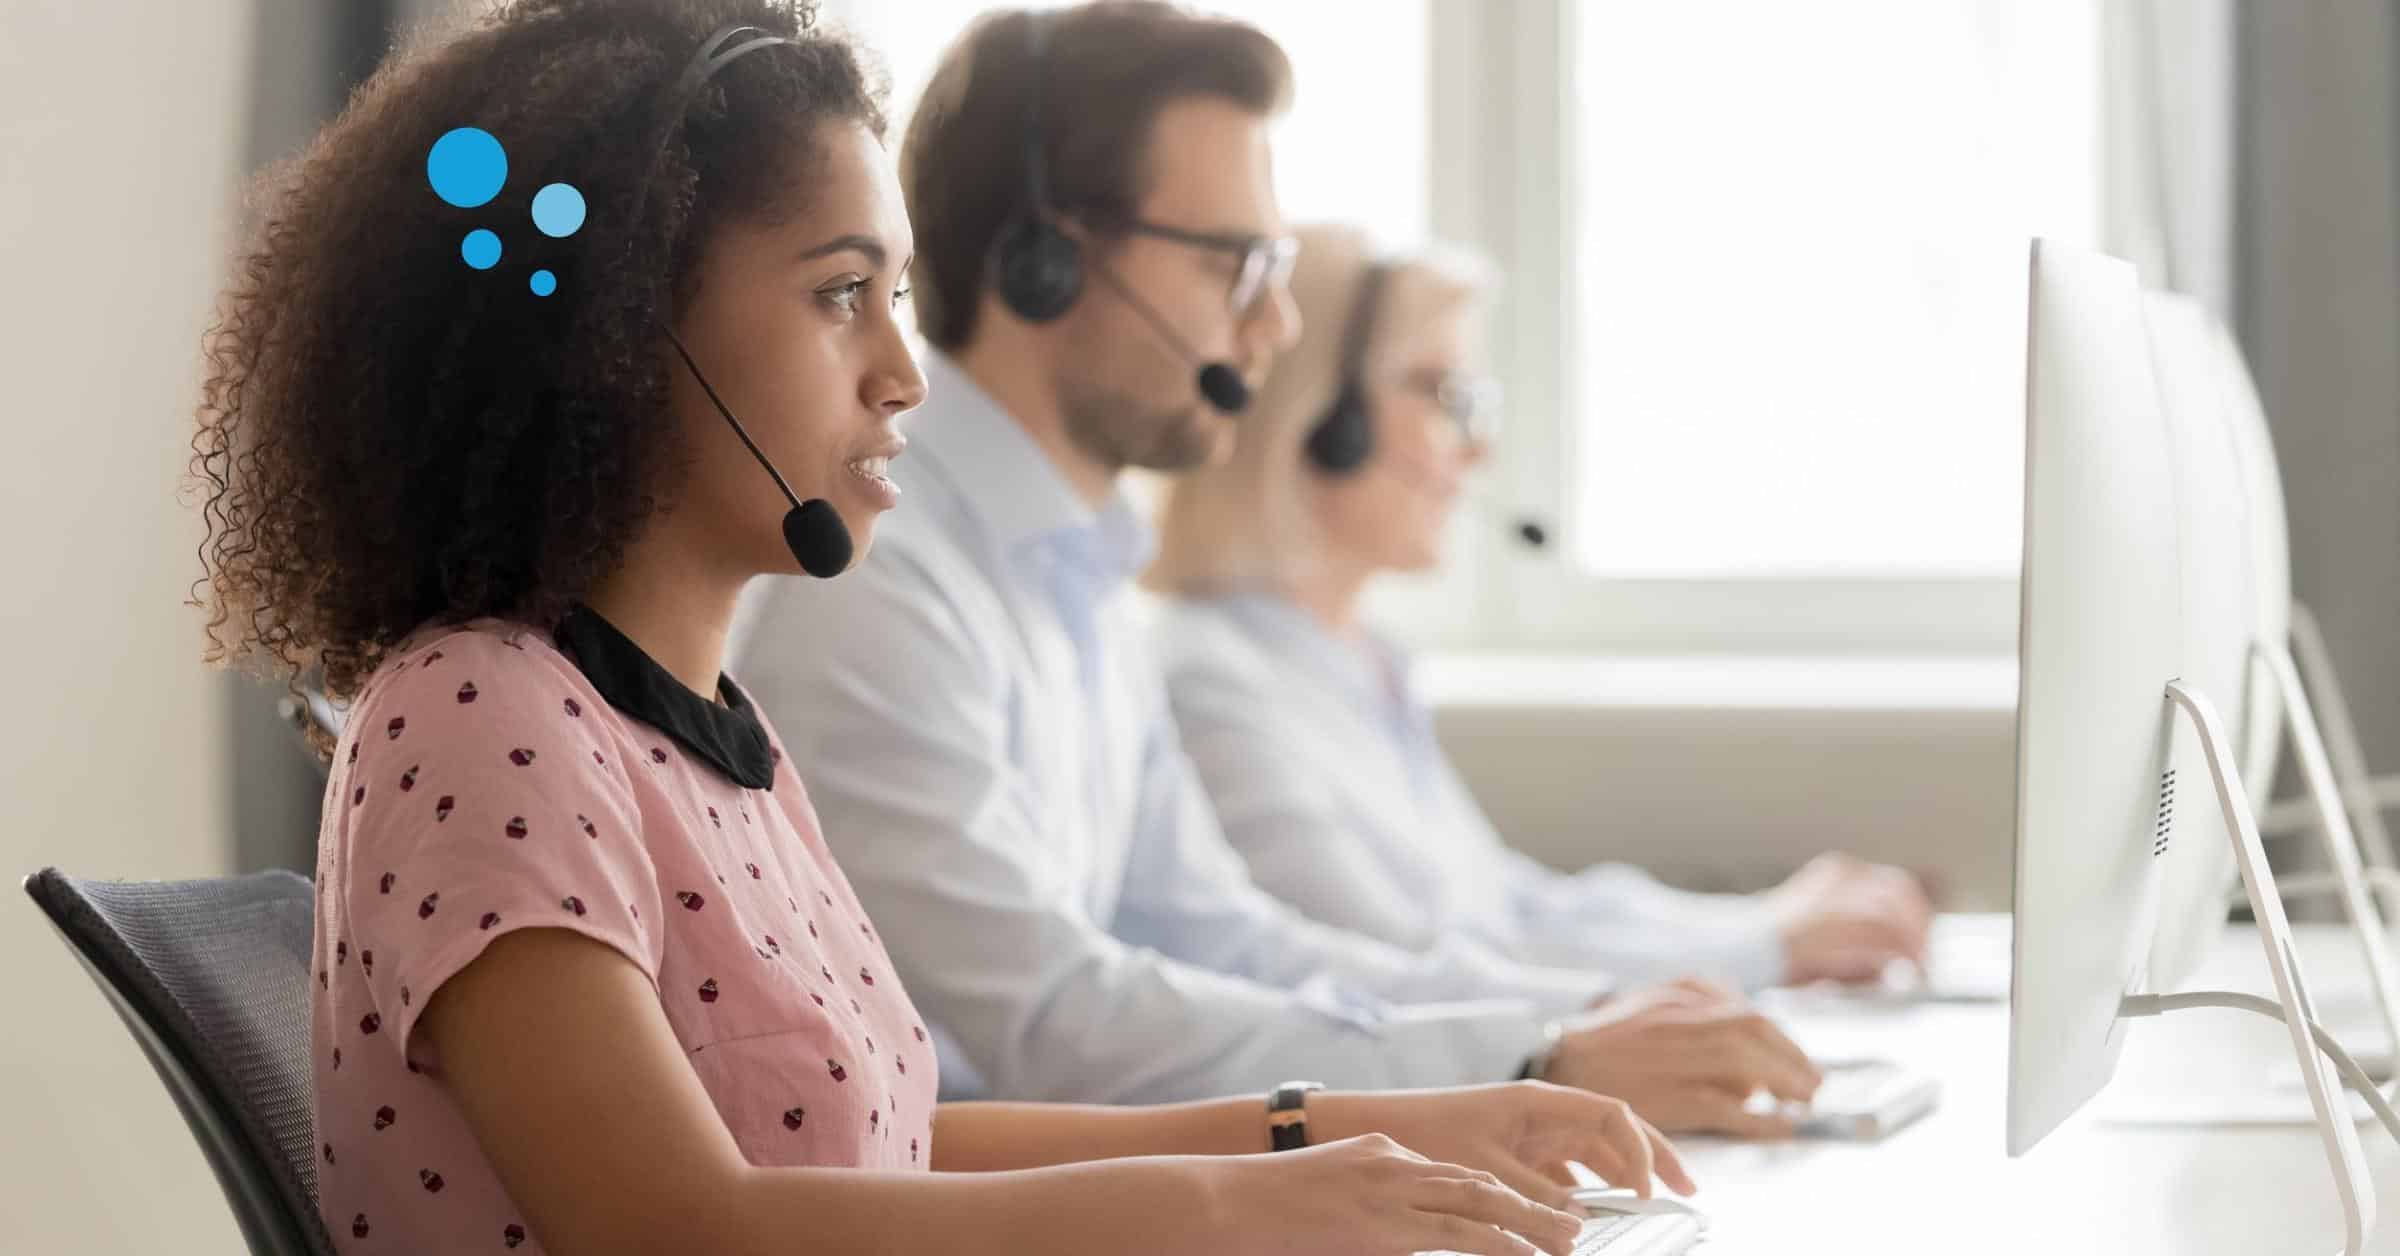 Bluetooth Headsets in the Contact Center A Cautionary Tale